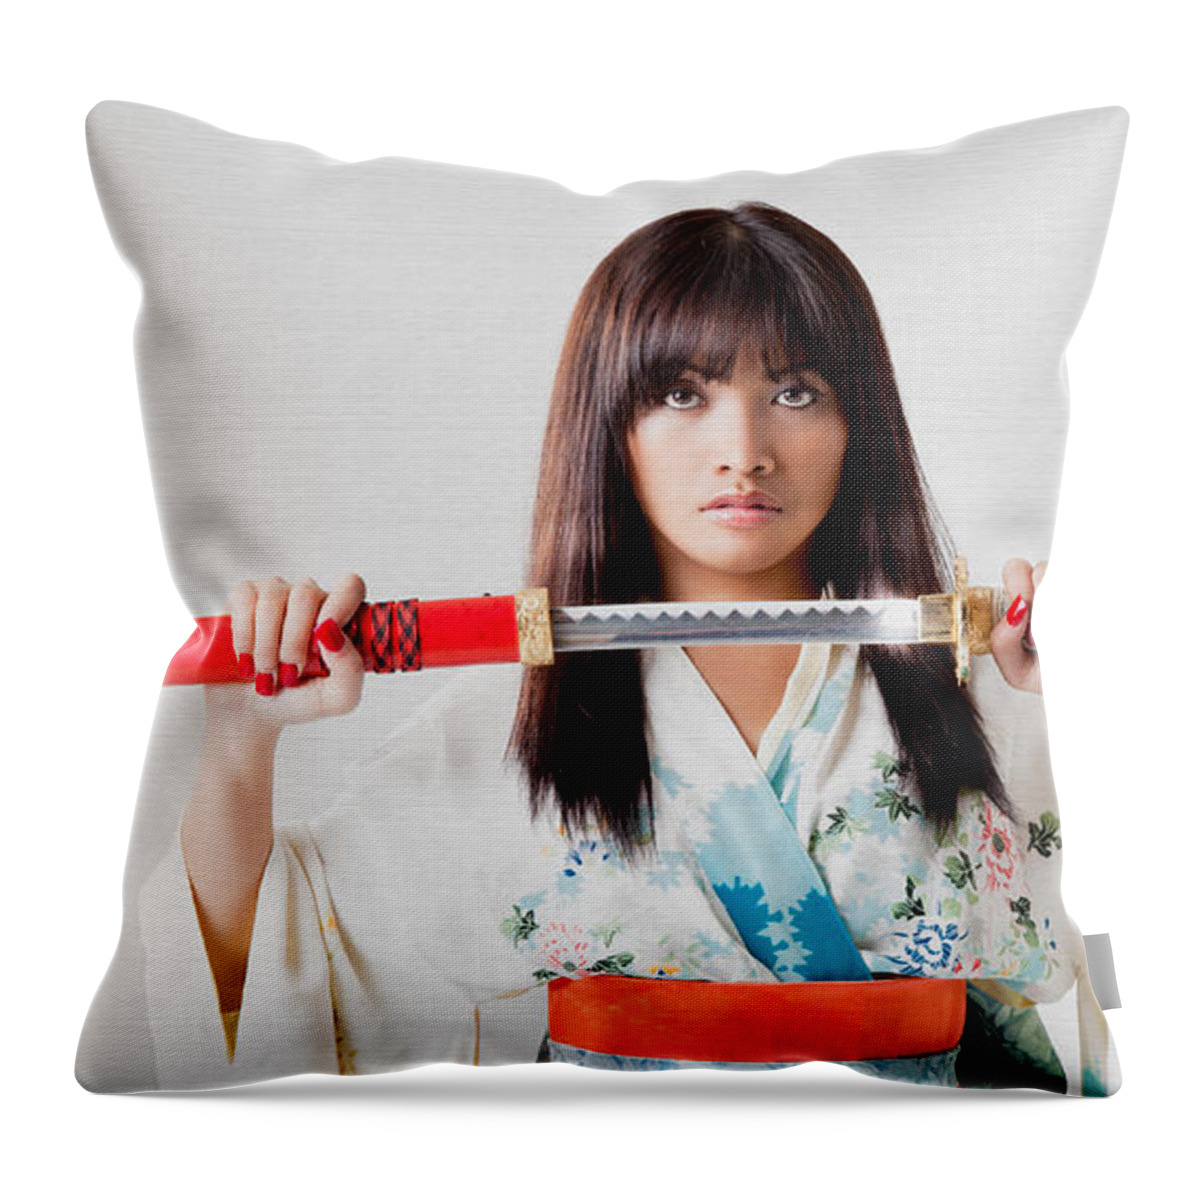 Models Throw Pillow featuring the photograph Vengeful Innocence by Rikk Flohr